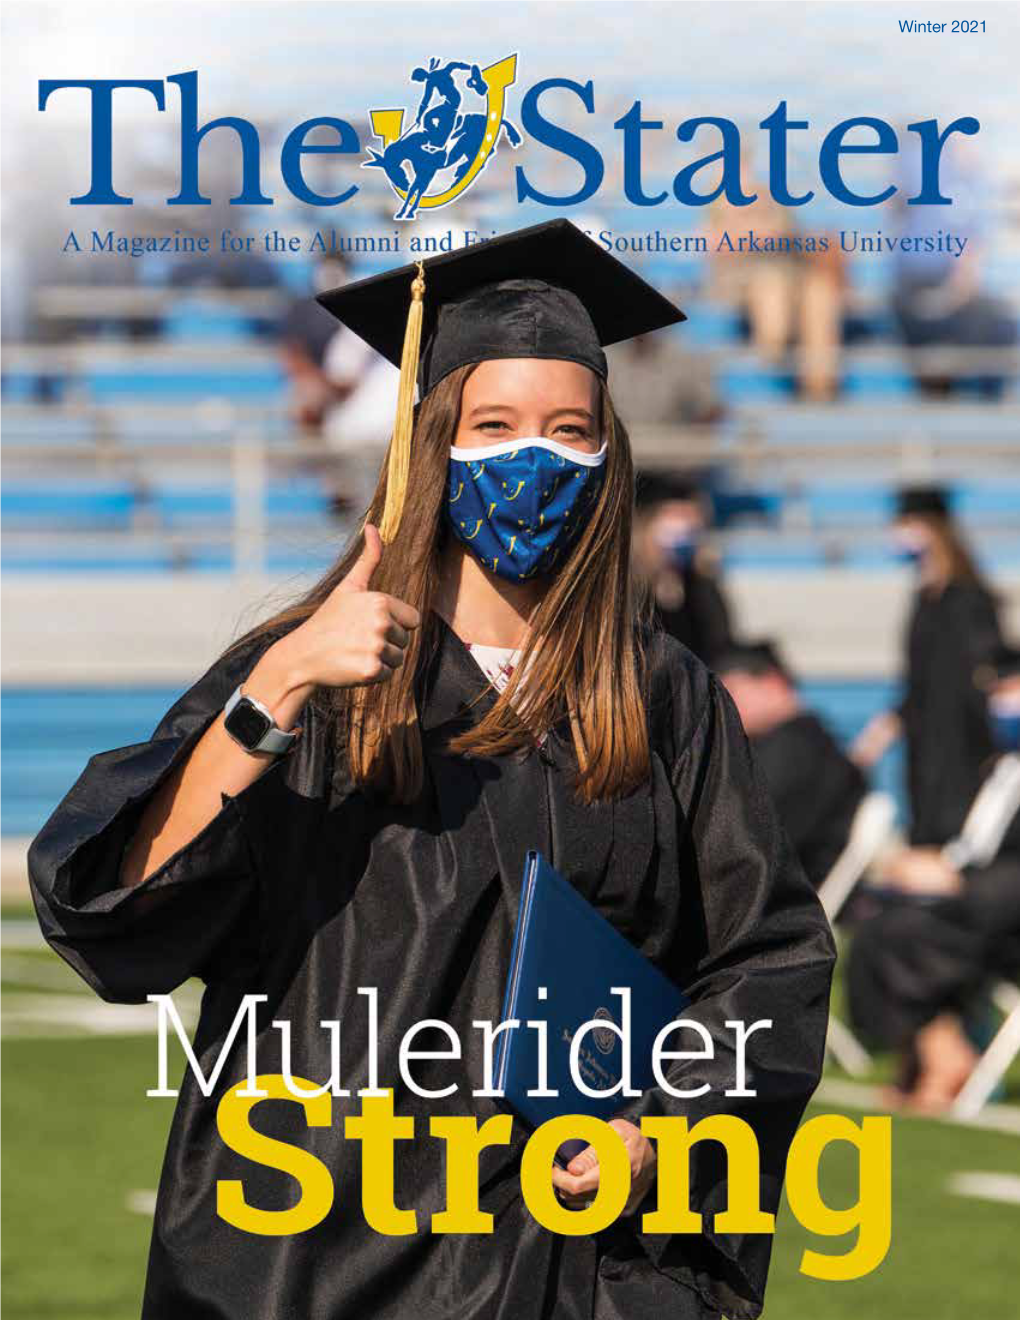 Winter 2021 Upcoming #Muleriderstrong Events